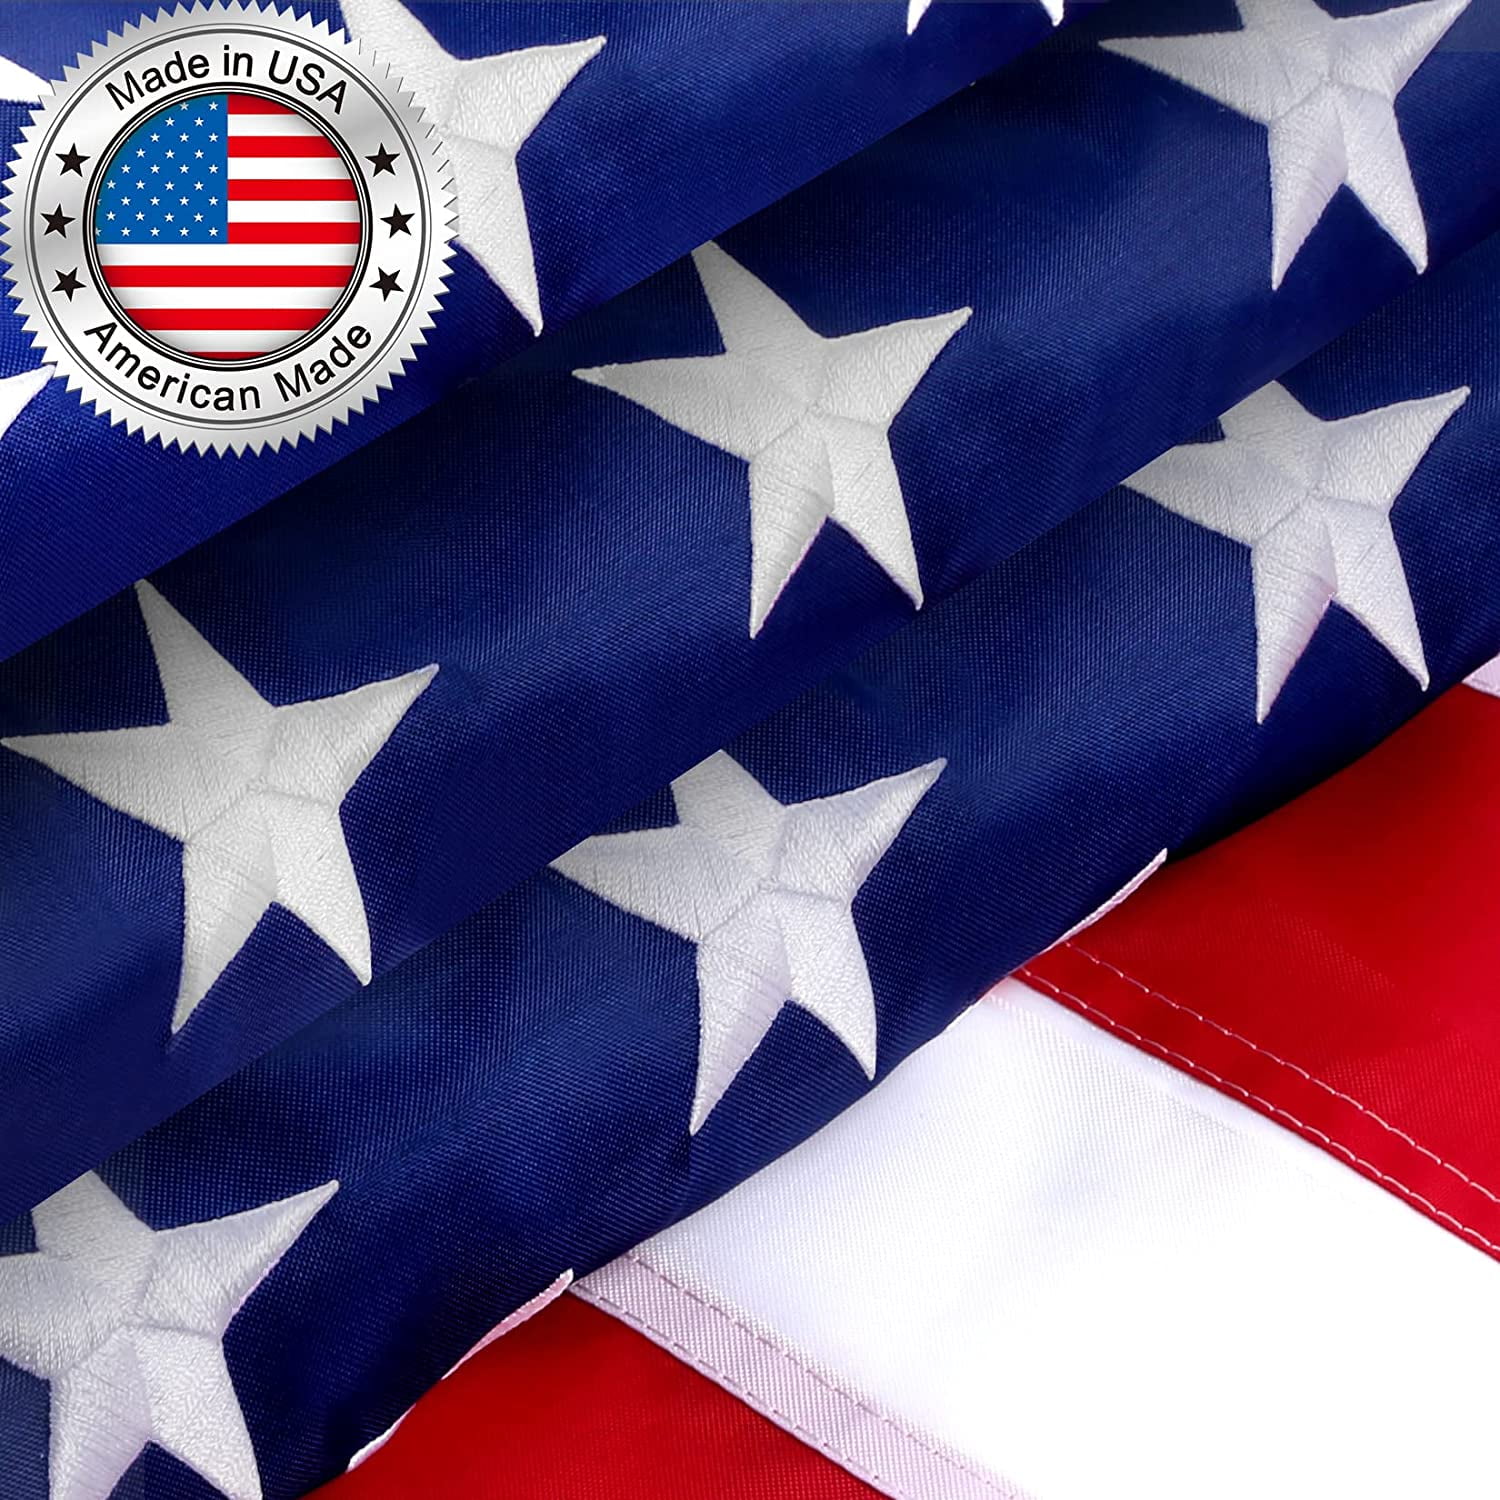 2x3FT US Flag Indoor/Outdoor Durable American Flags American Flag Brass Grommets UV Protection Premium Quality American Flags Heavy duty 210D Oxford Material with Embroidered Stars,Sewn Stripes 